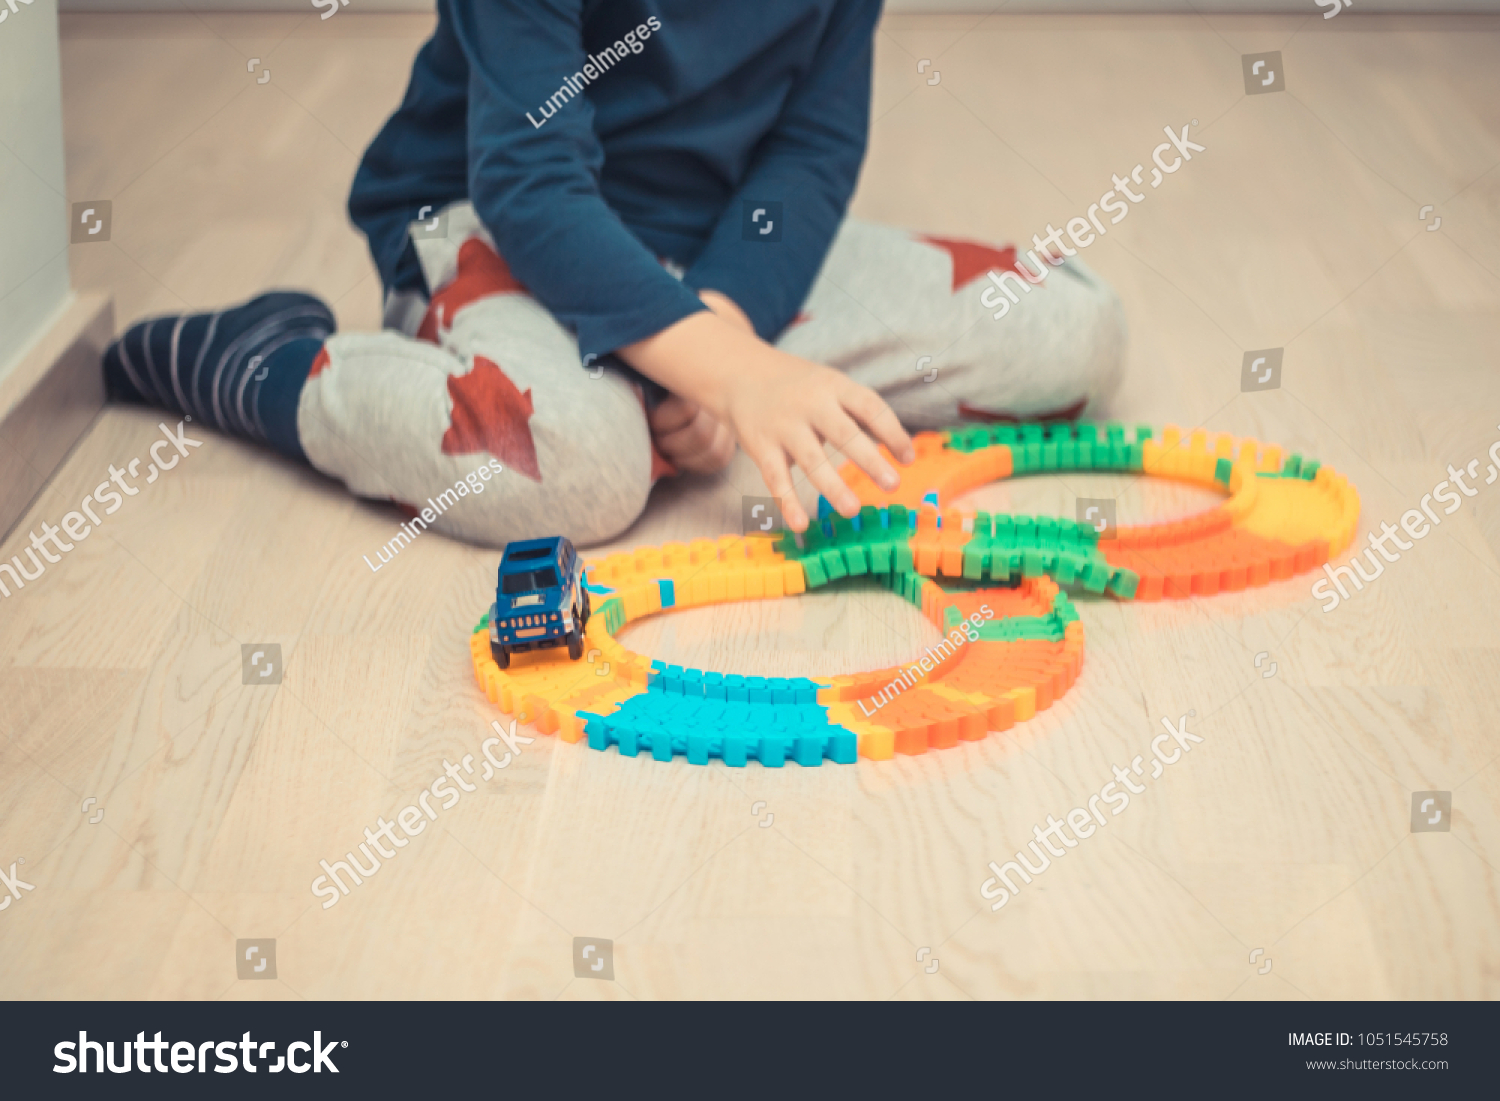 Unrecognizable boy making a trail and playing with car toy on the floor. #1051545758